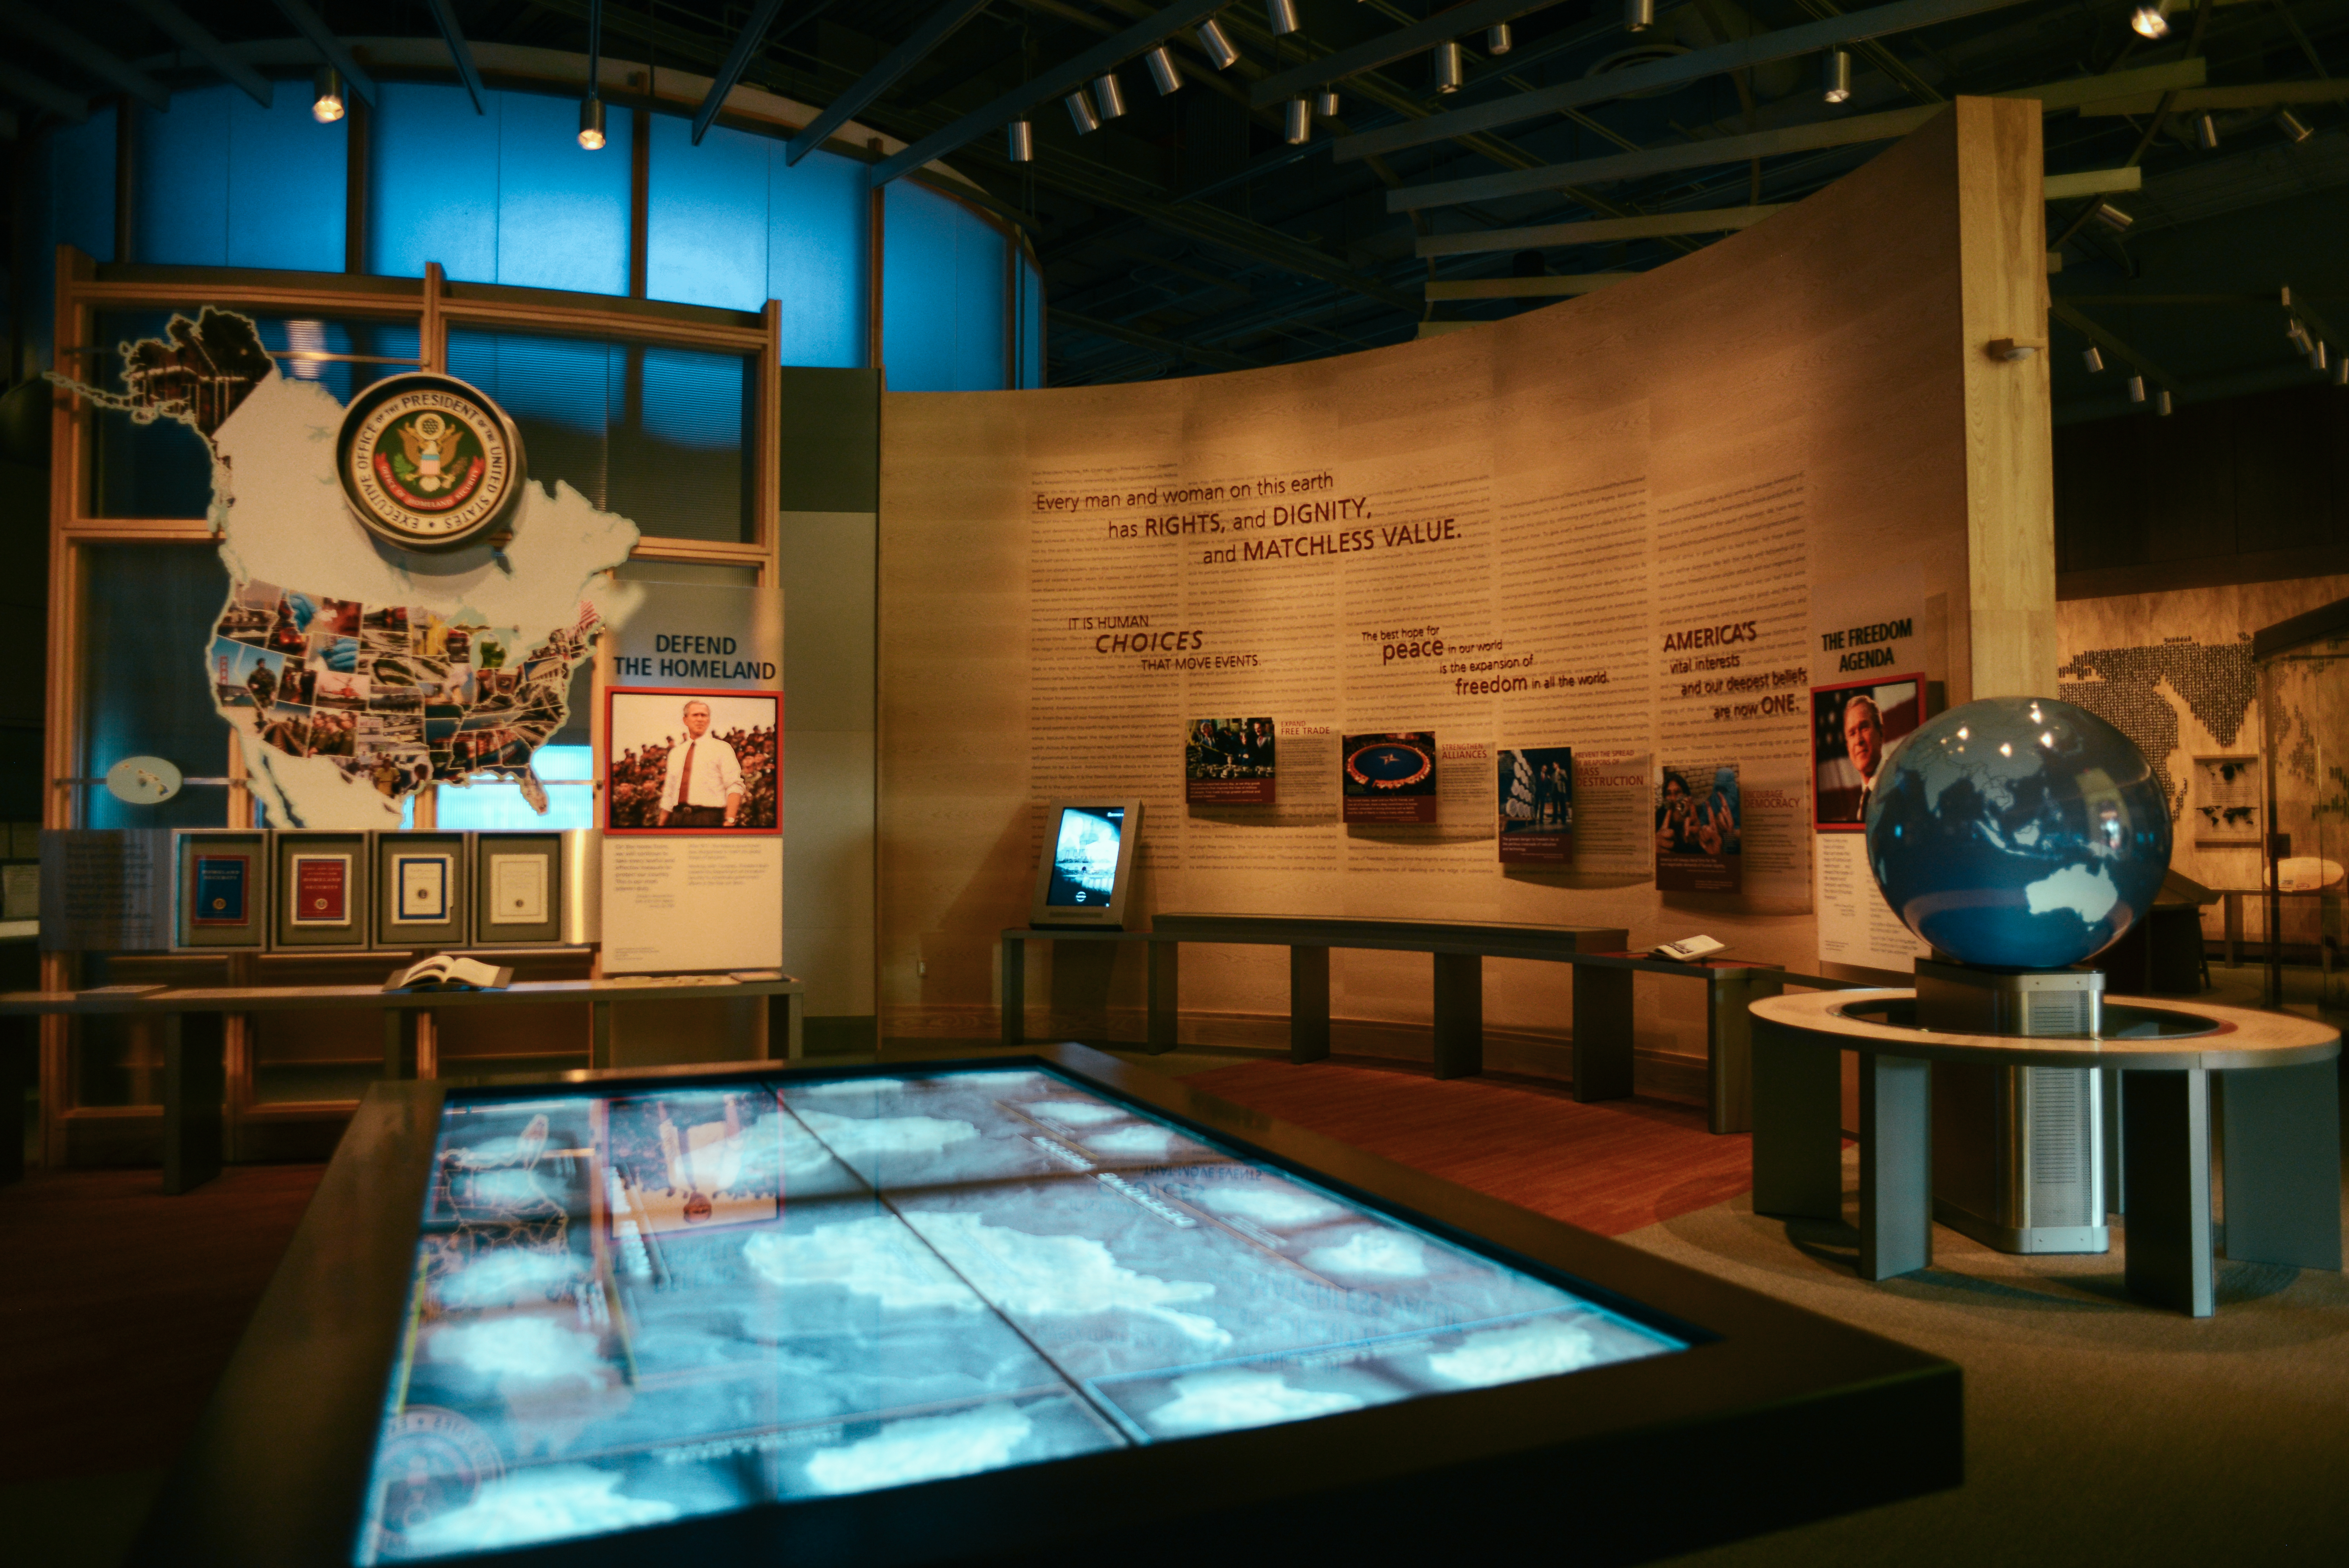 A view of the Defend the Homeland display at the George W Bush Library and Museum